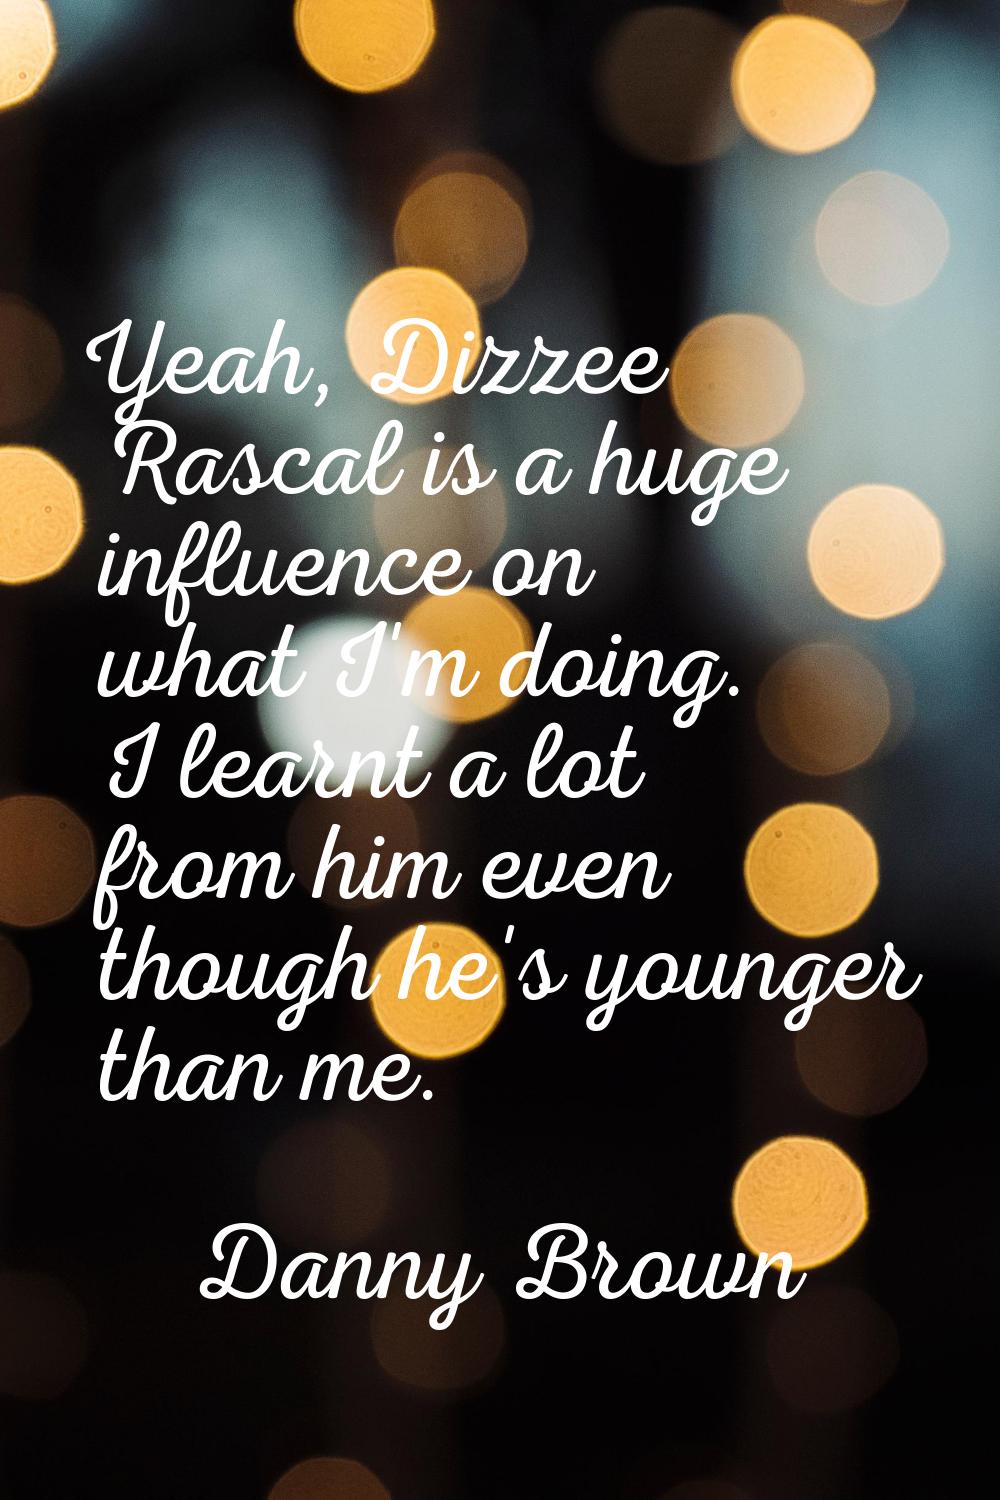 Yeah, Dizzee Rascal is a huge influence on what I'm doing. I learnt a lot from him even though he's